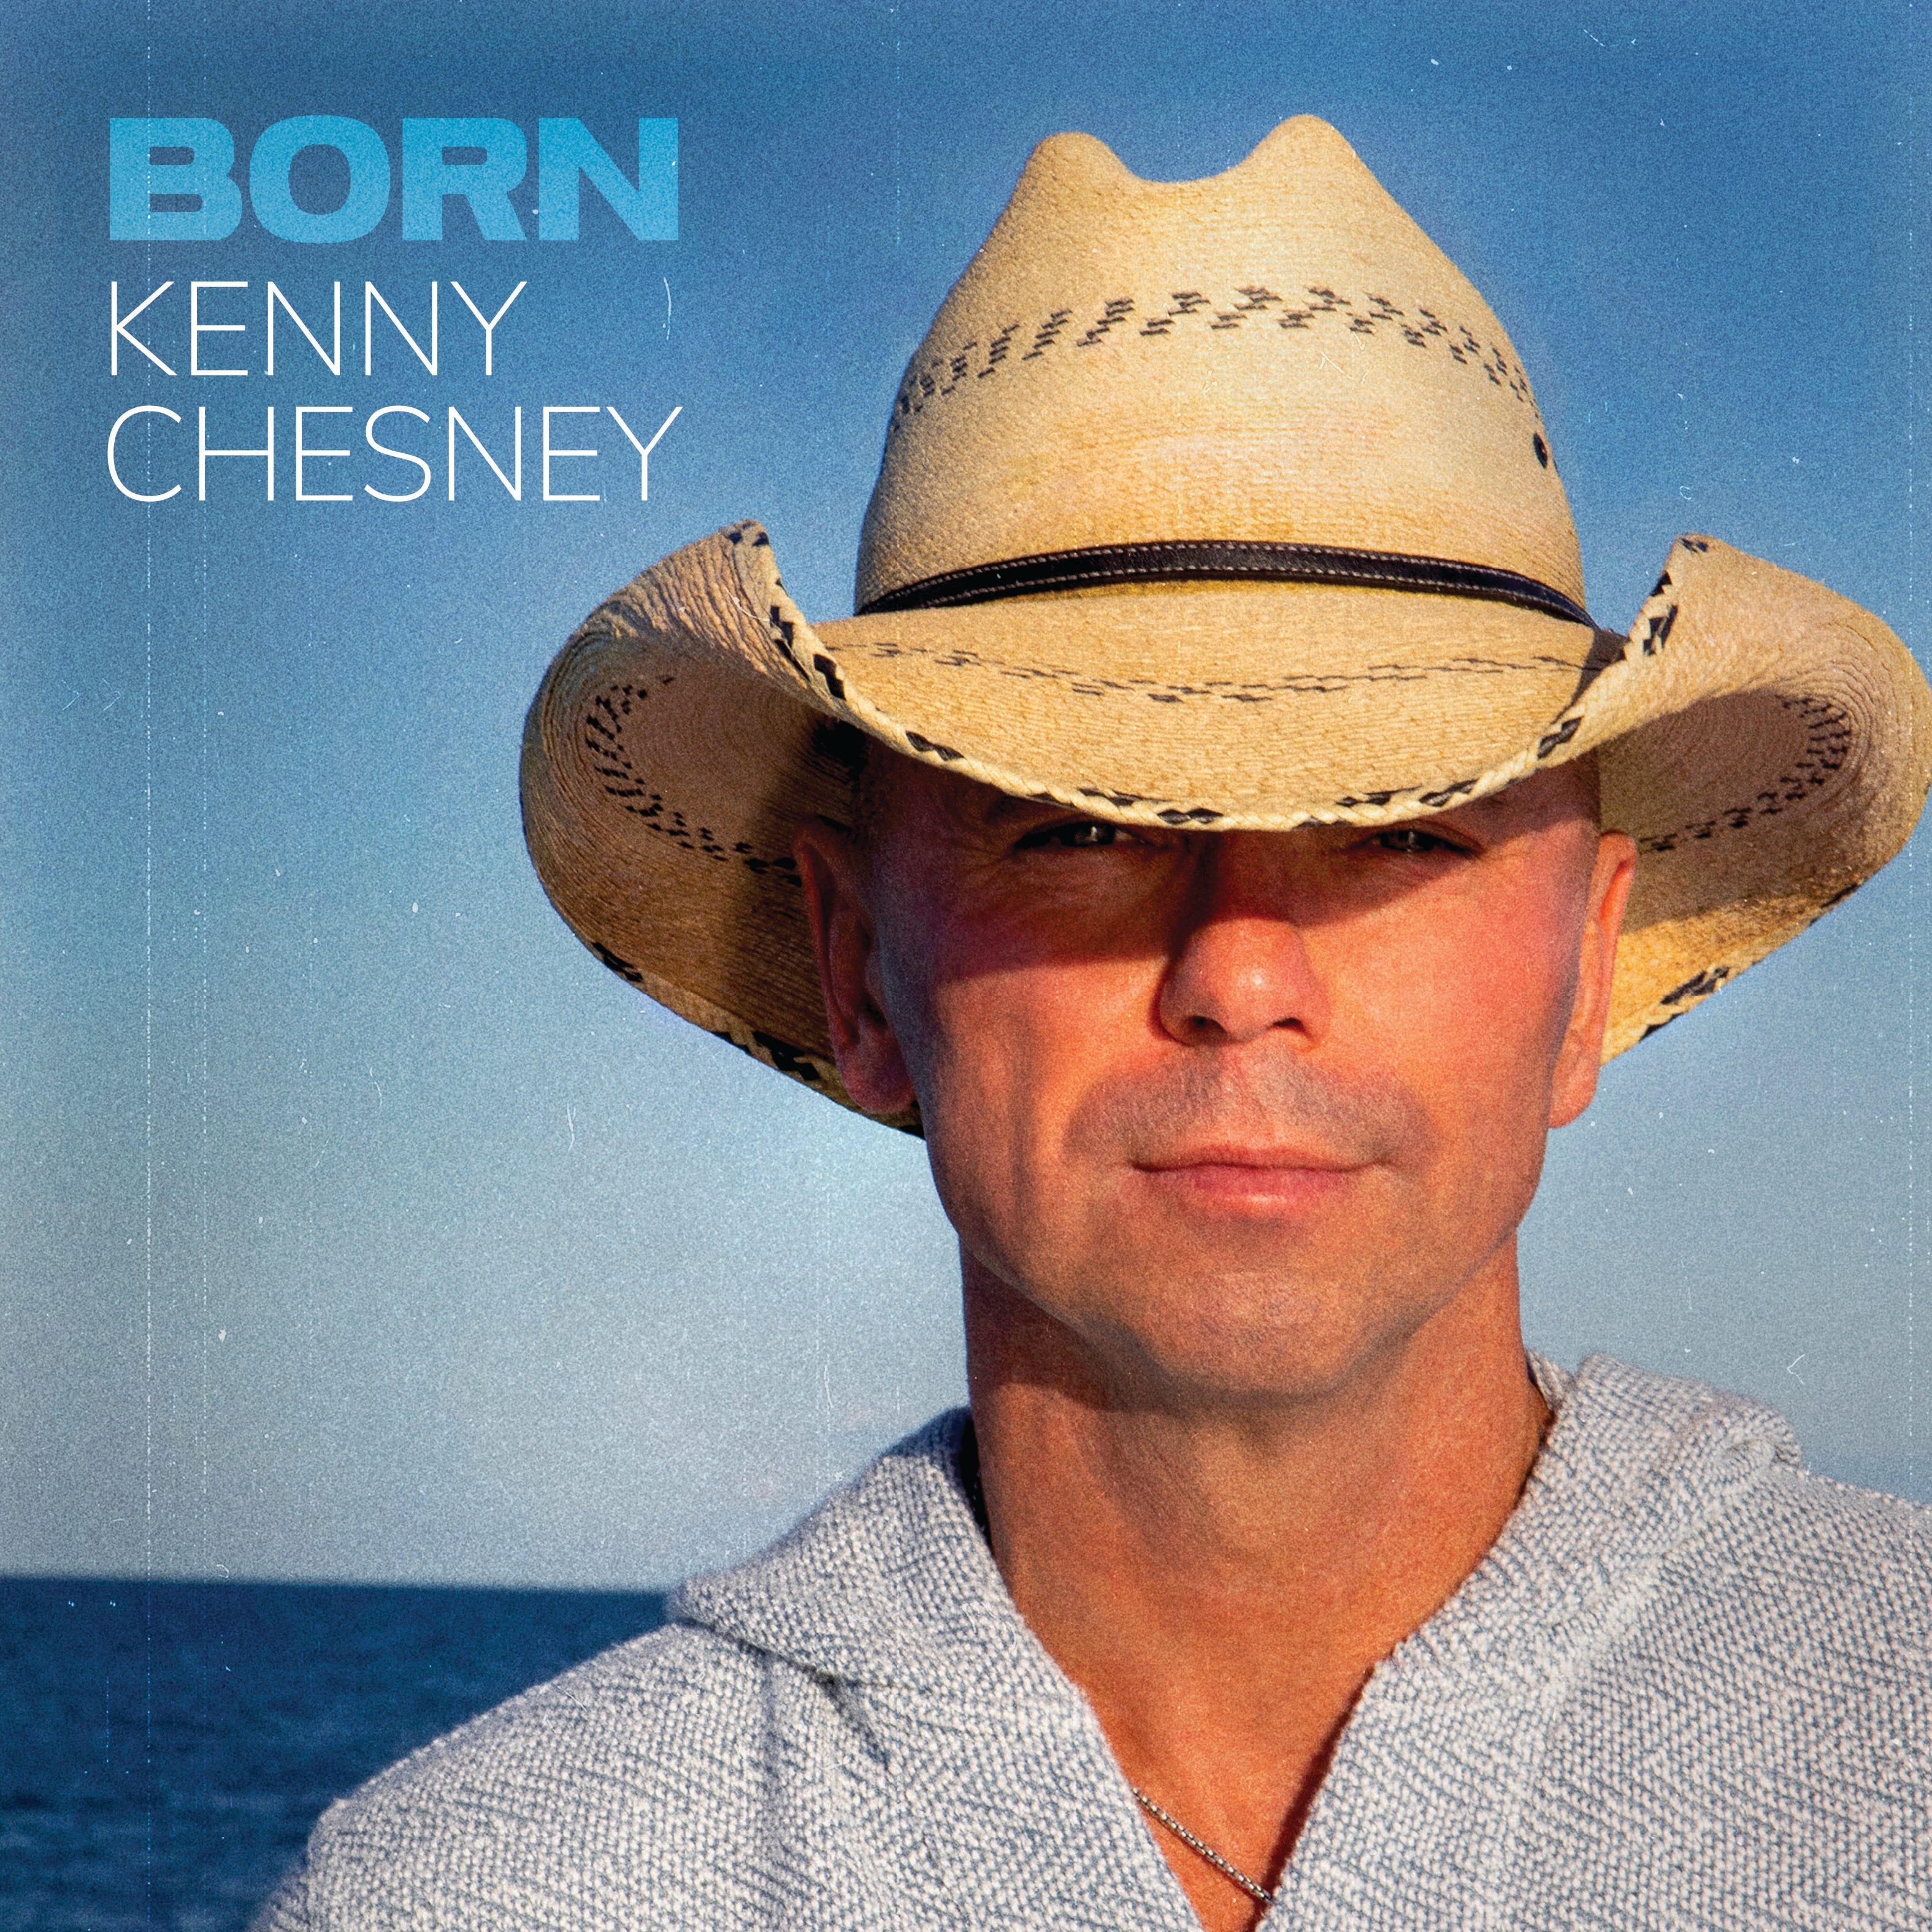 When will Kenny Chesney's new album, 'BORN,' be released in 2024?